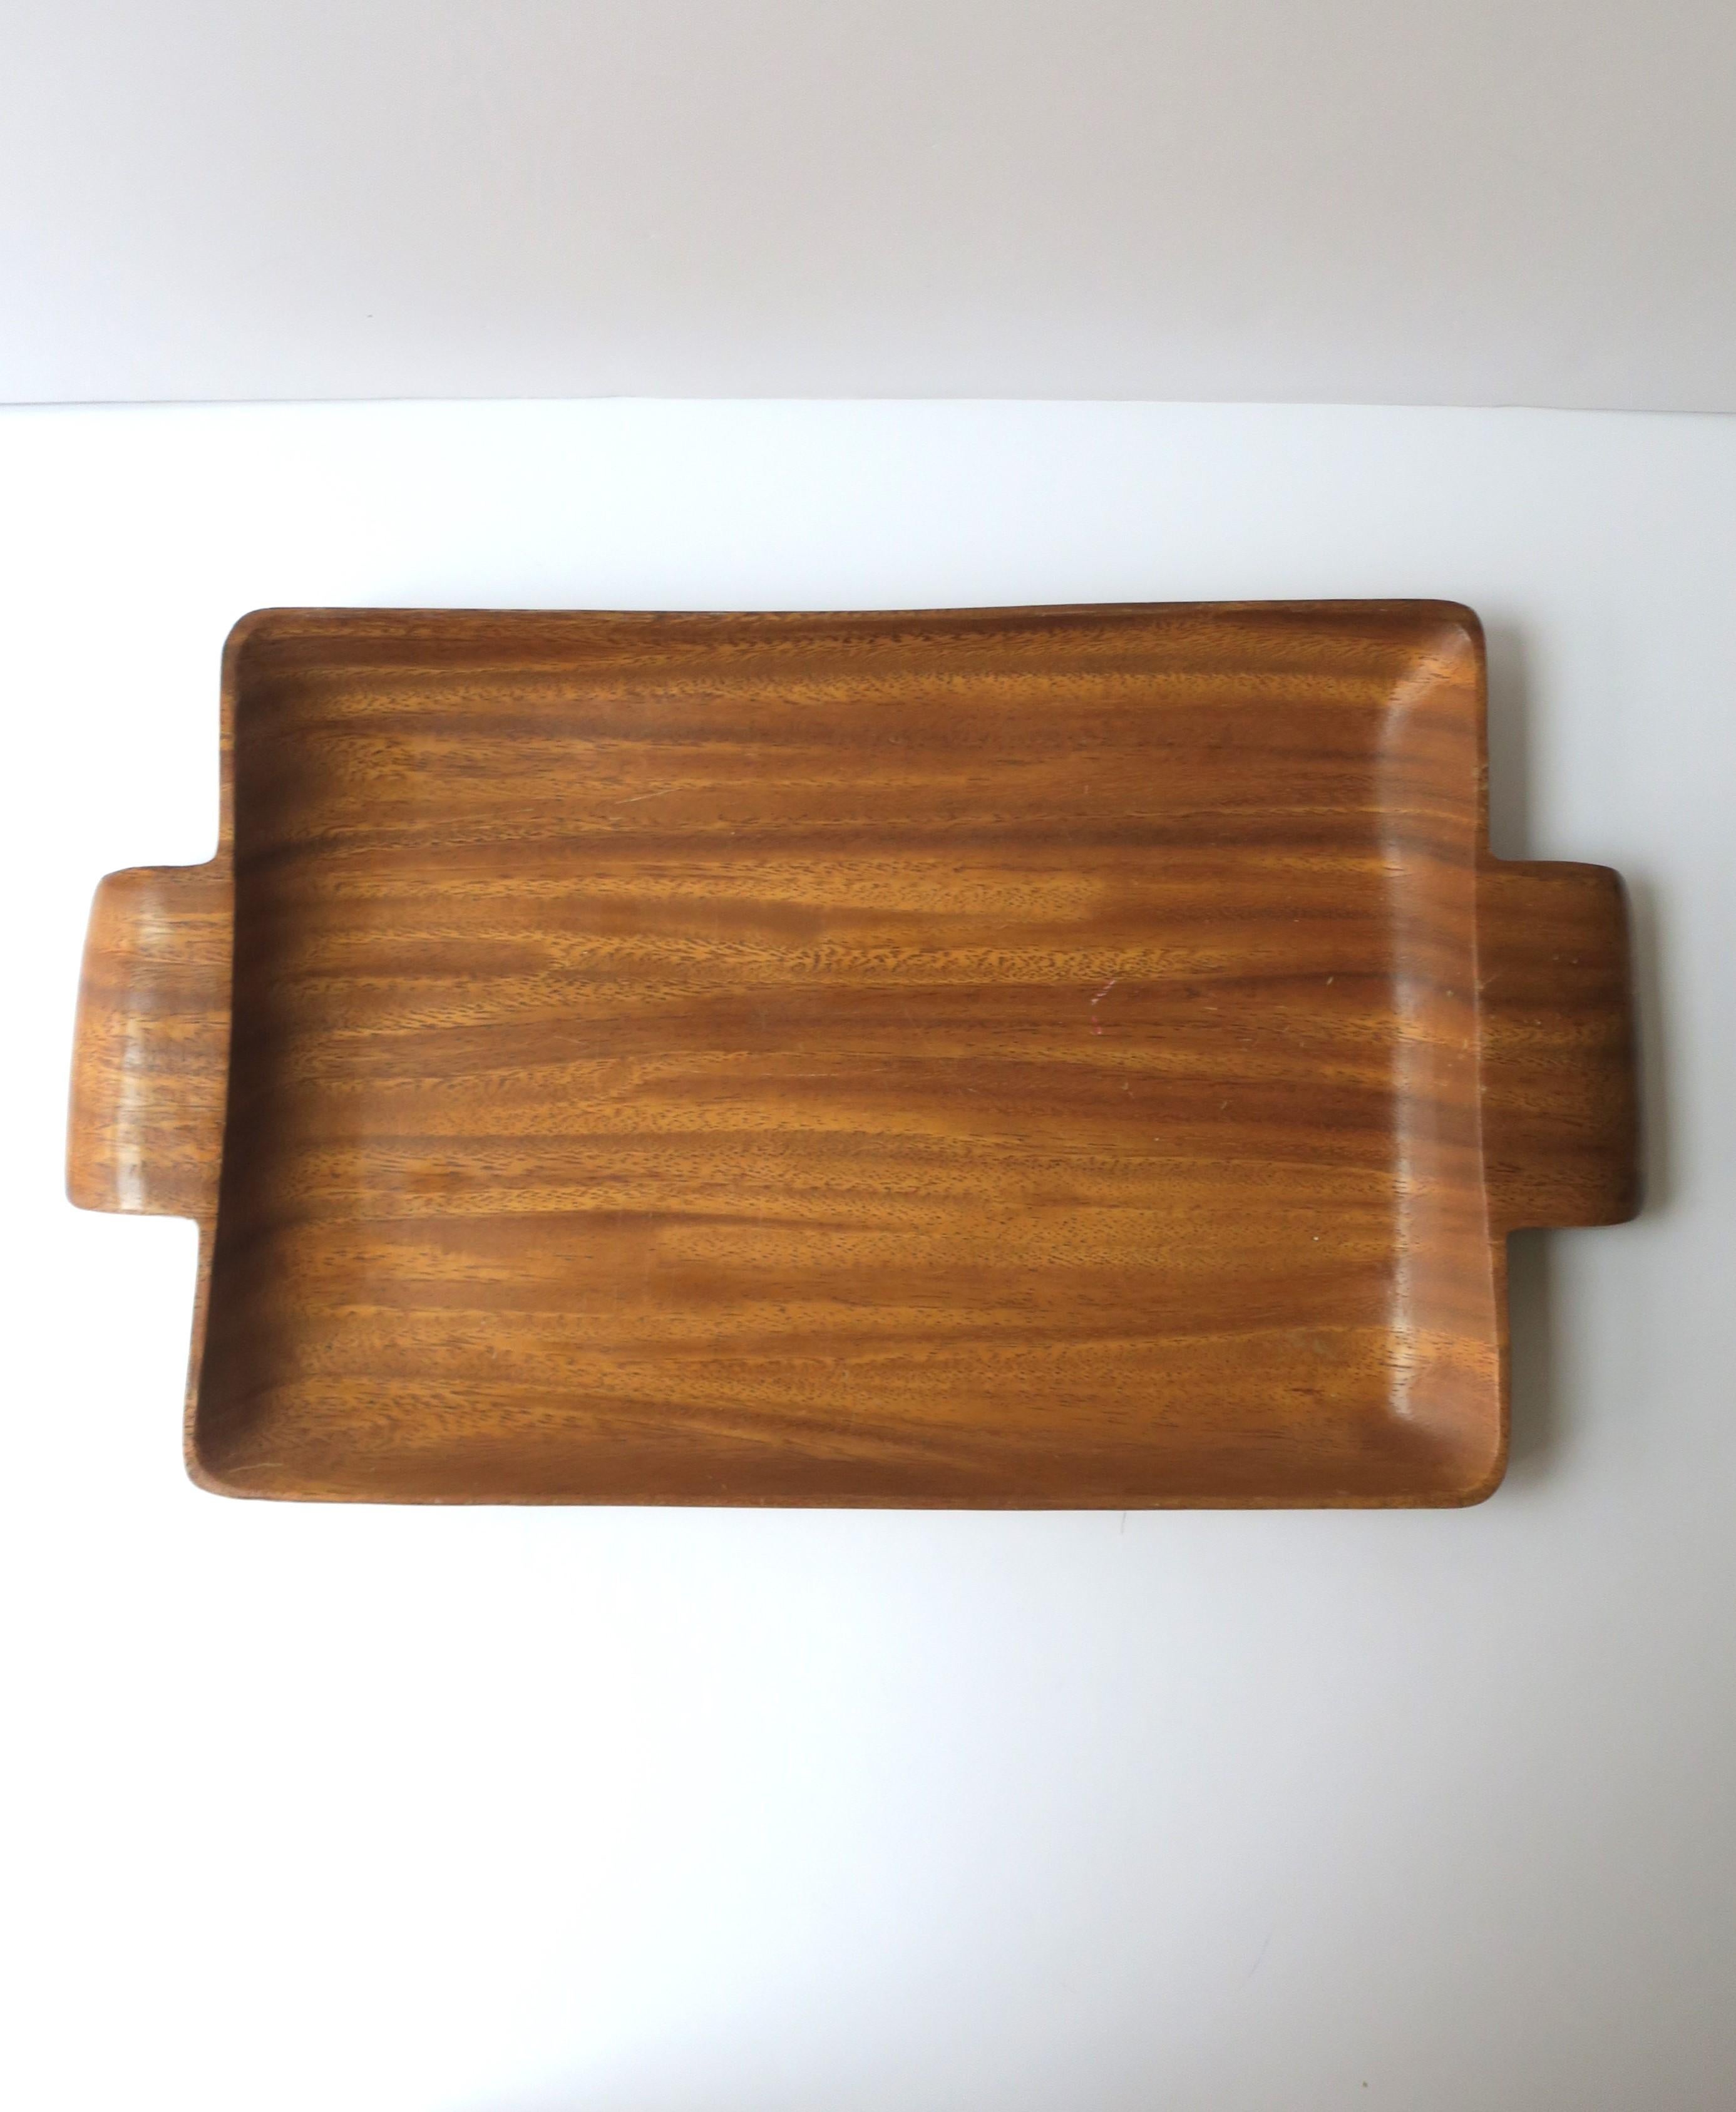 A light-weight Art Deco wood serving tray with handles, circa mid-20th century. Dimensions: 9.82